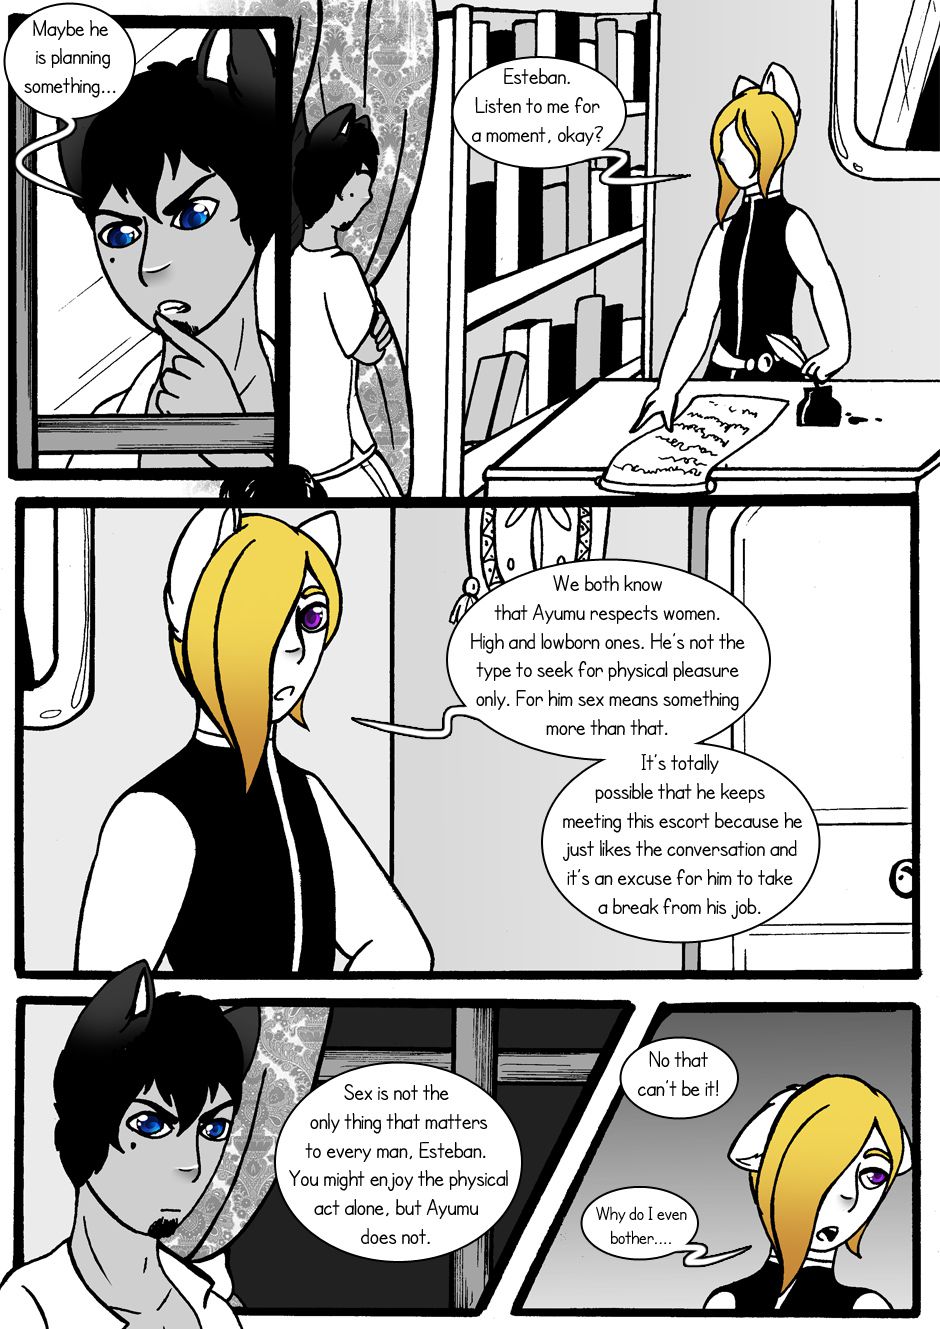 [Jeny-jen94] Between Kings and Queens [Ongoing] 62